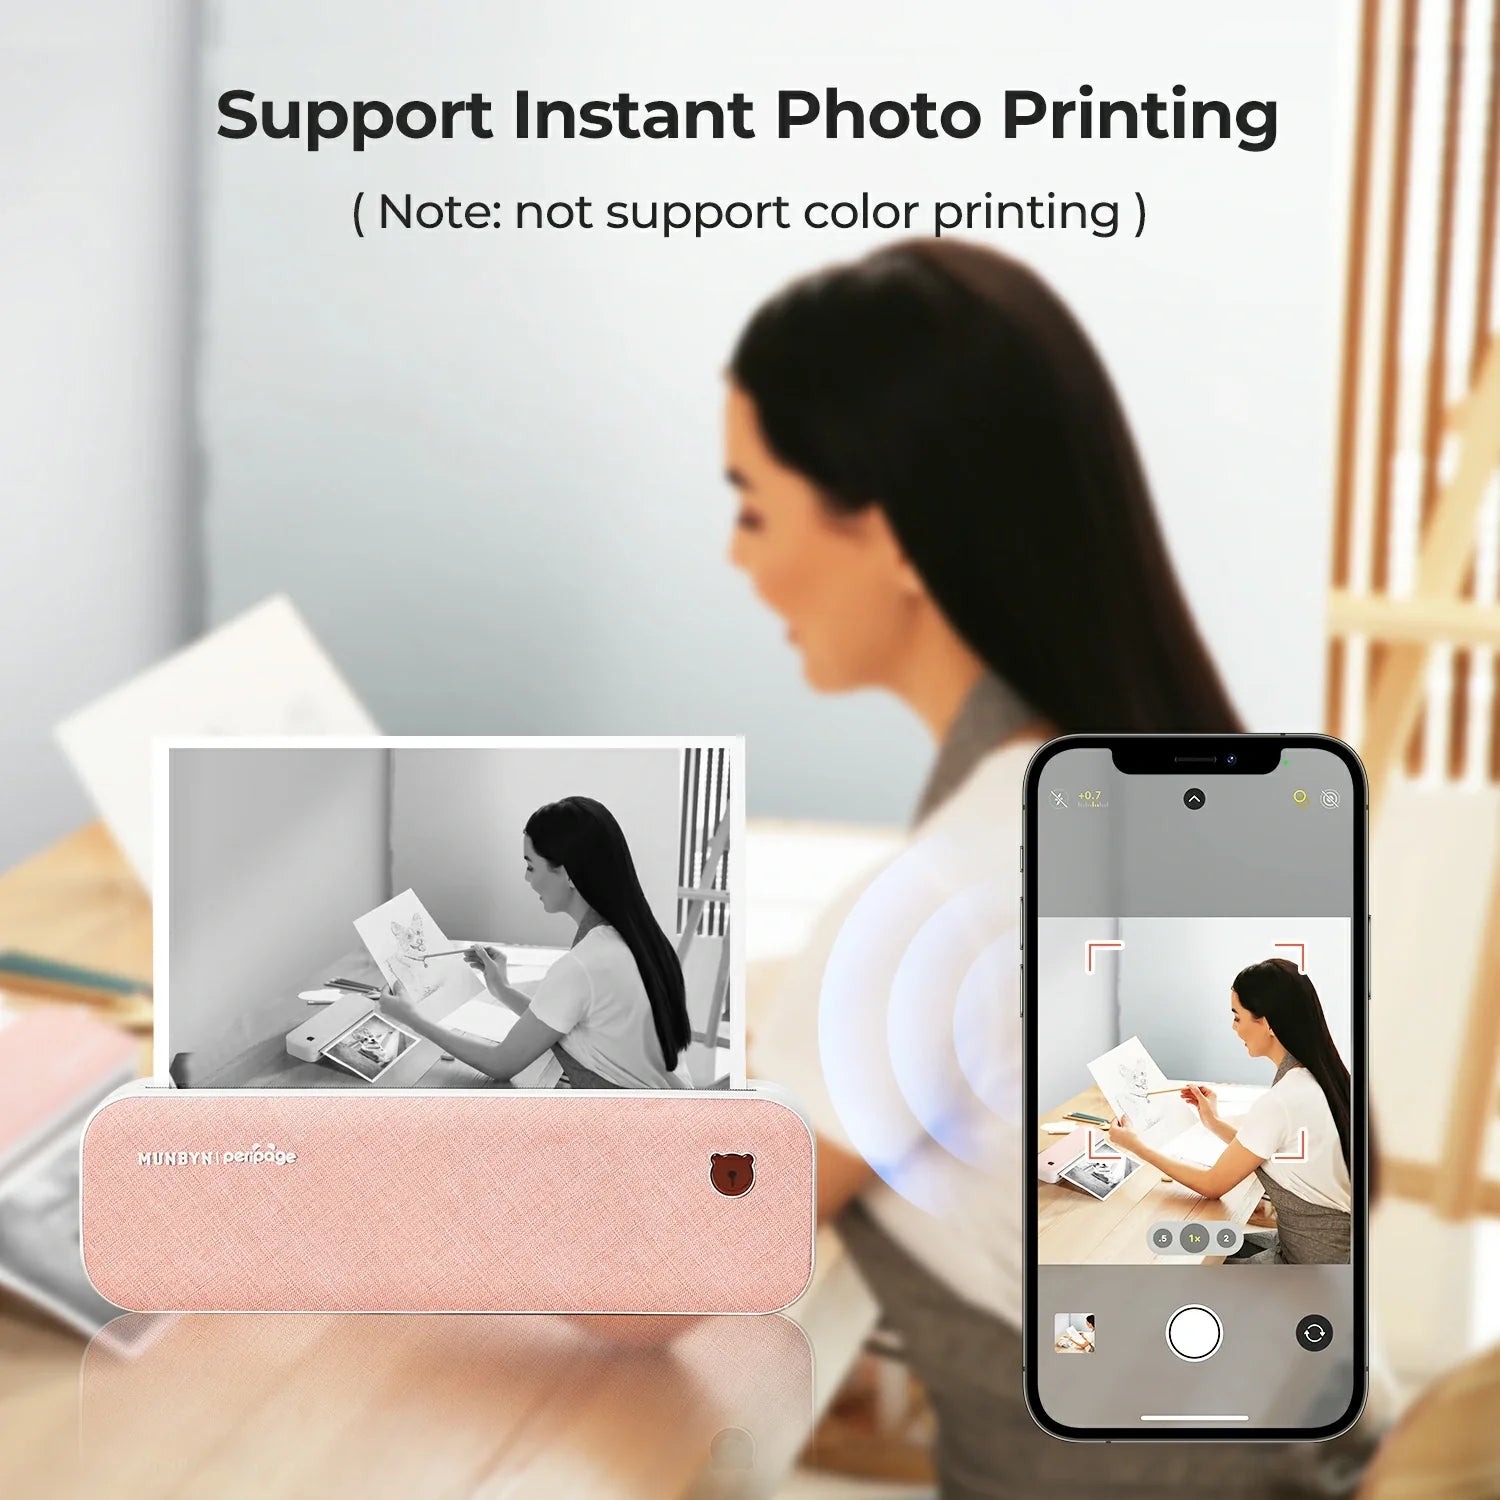 The MUNBYN A4 mobile thermal printer support instant monochrome photo printing.